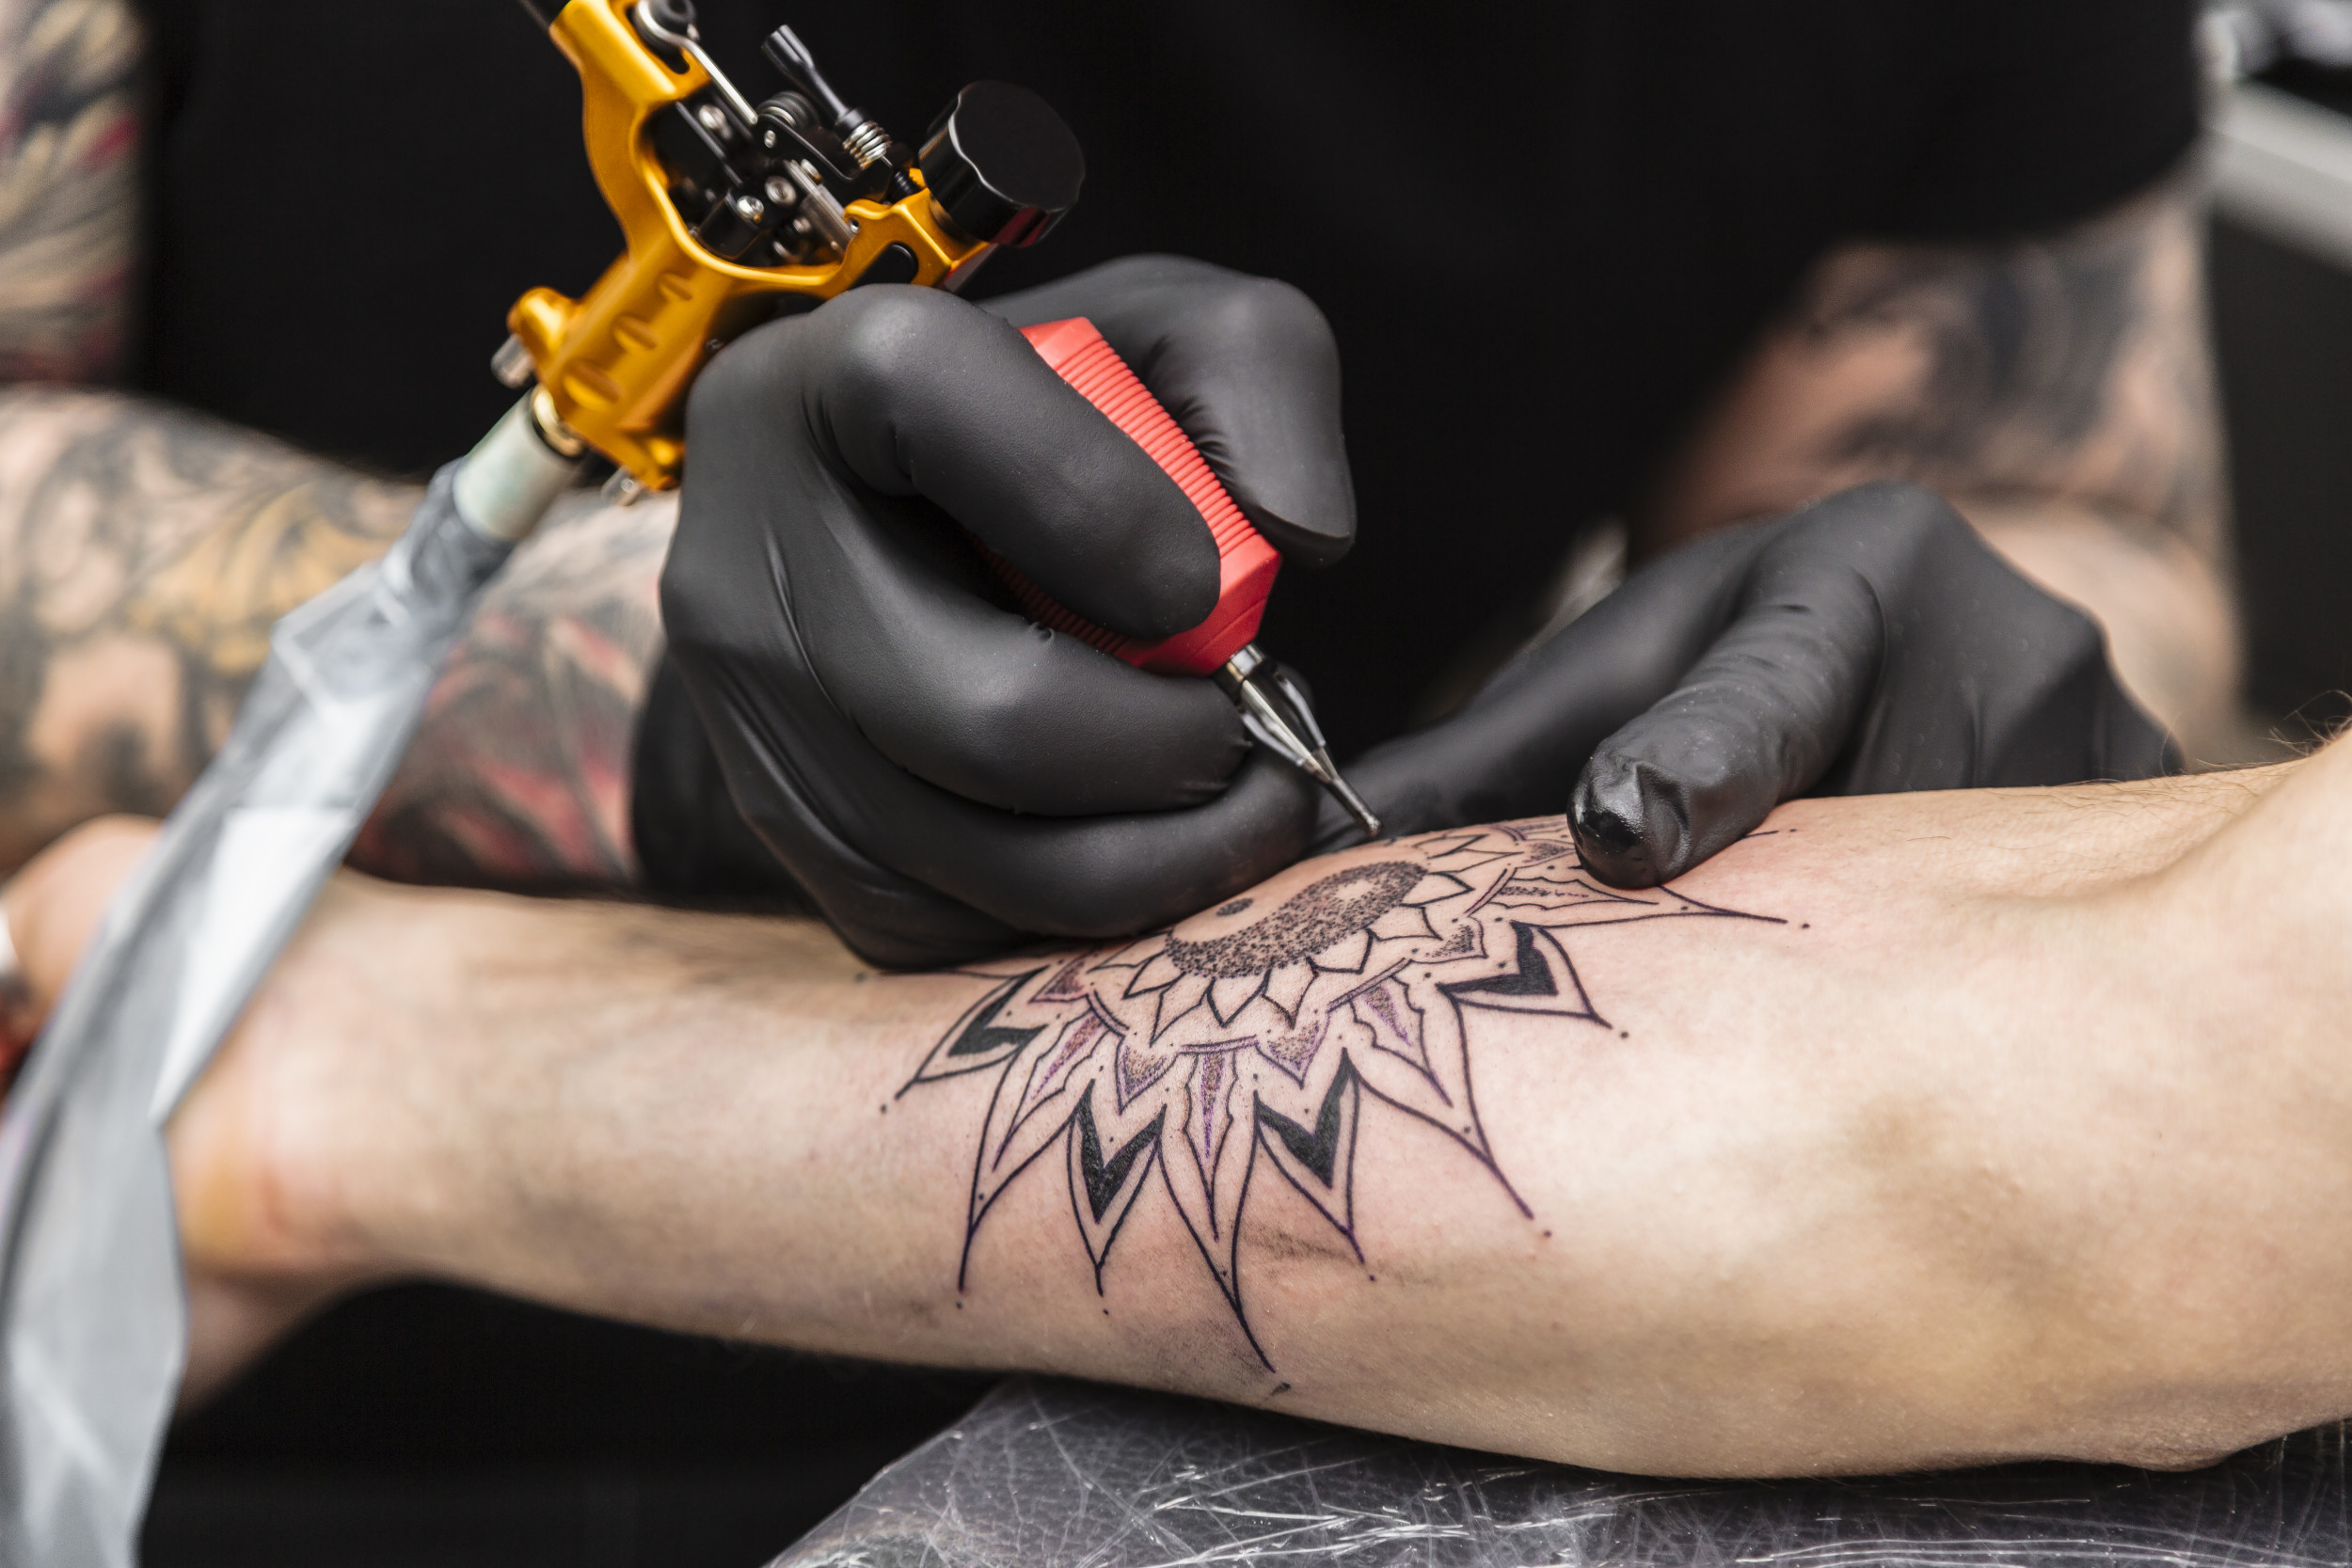 Tattoo Allergy Rash and Other Reactions to Ink Treatment  More